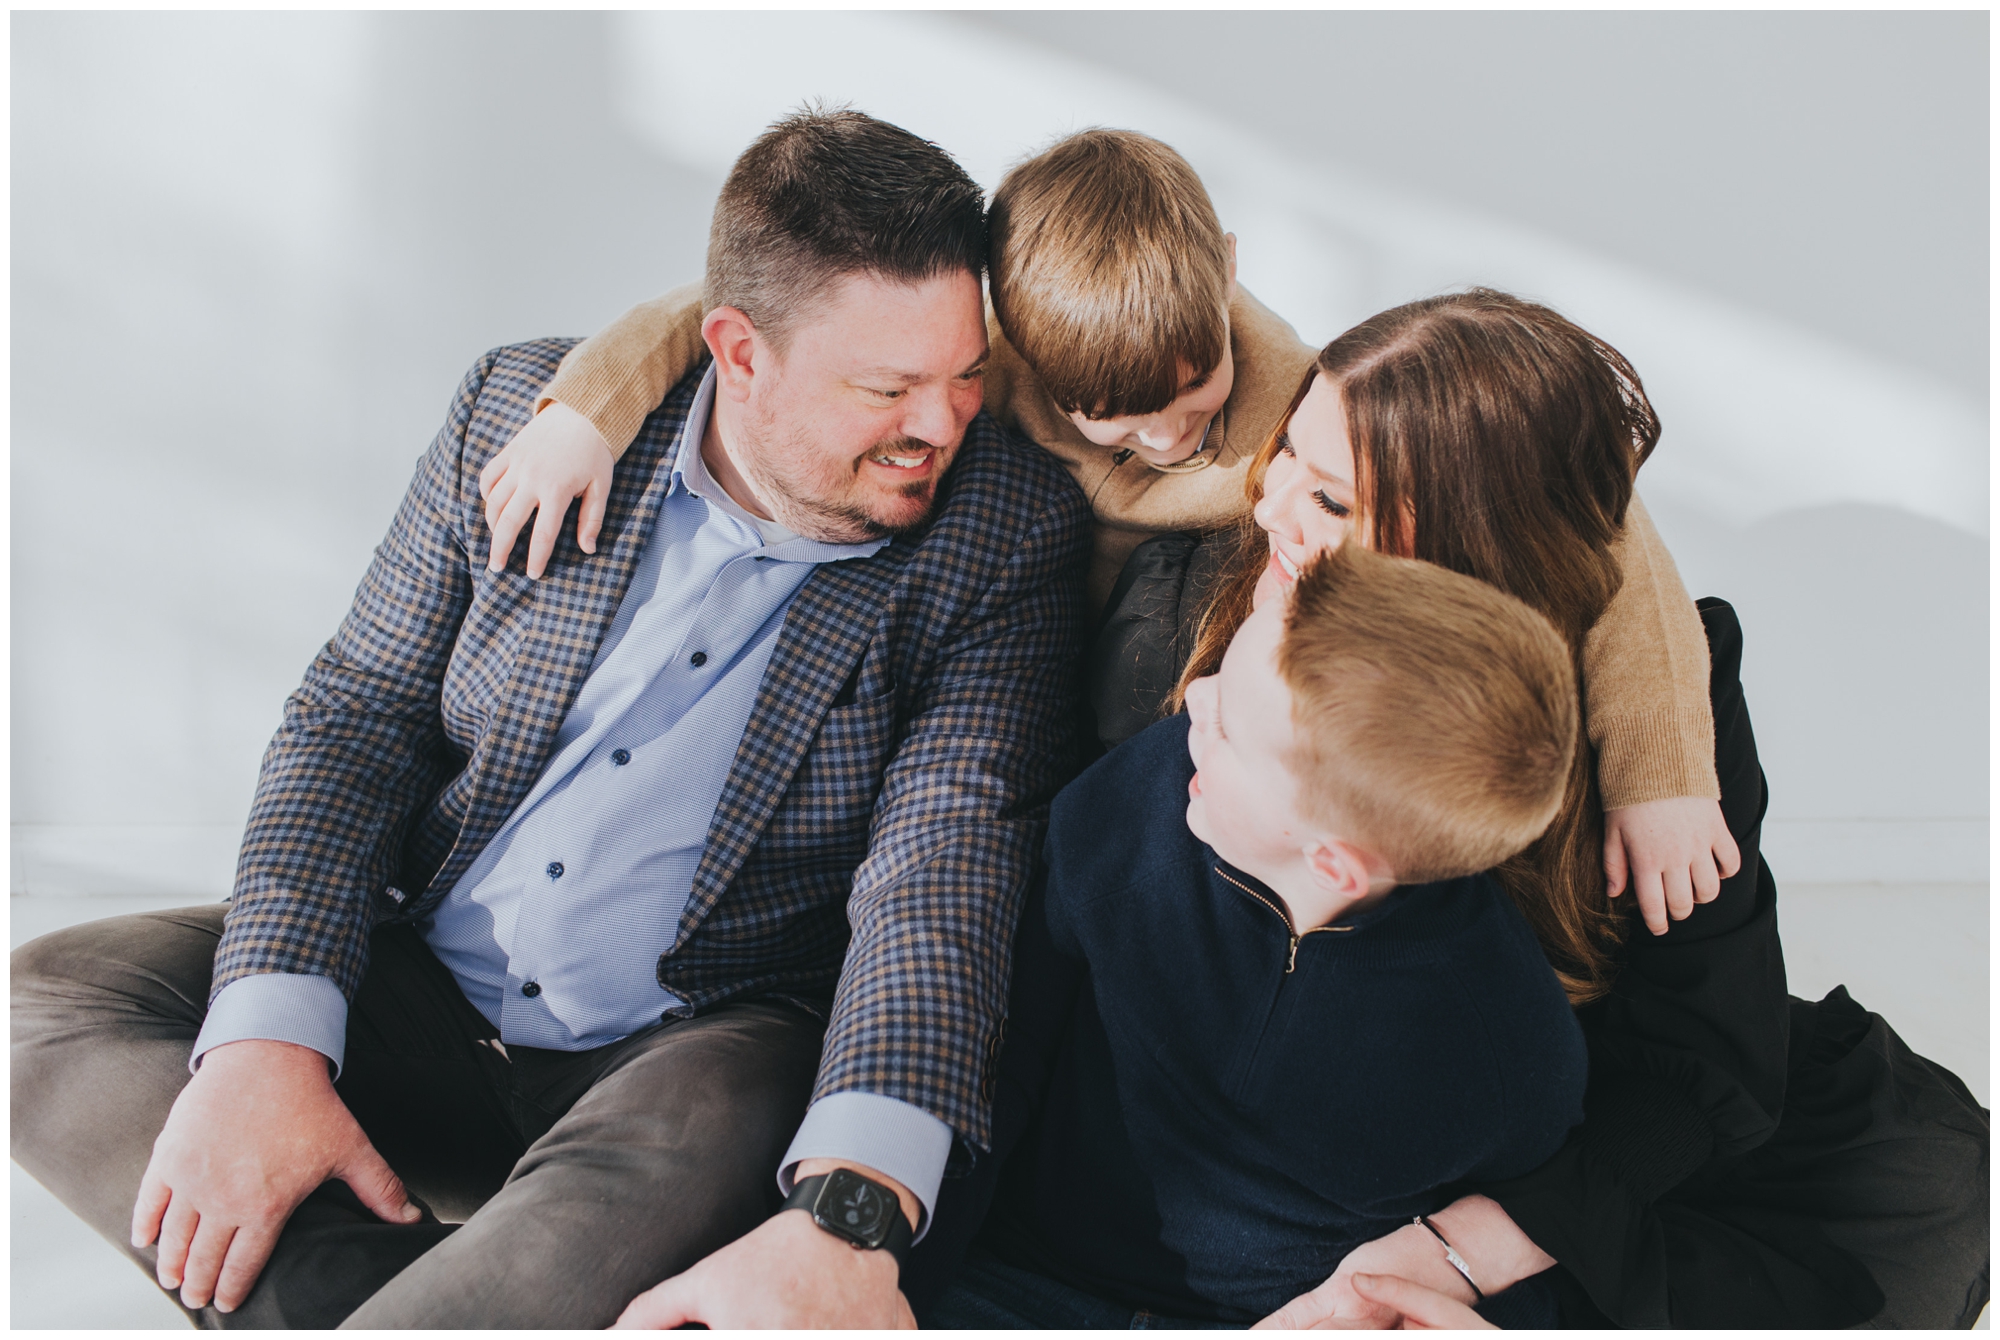 photography studio family session in New Lenox by Meg Adamik Creative